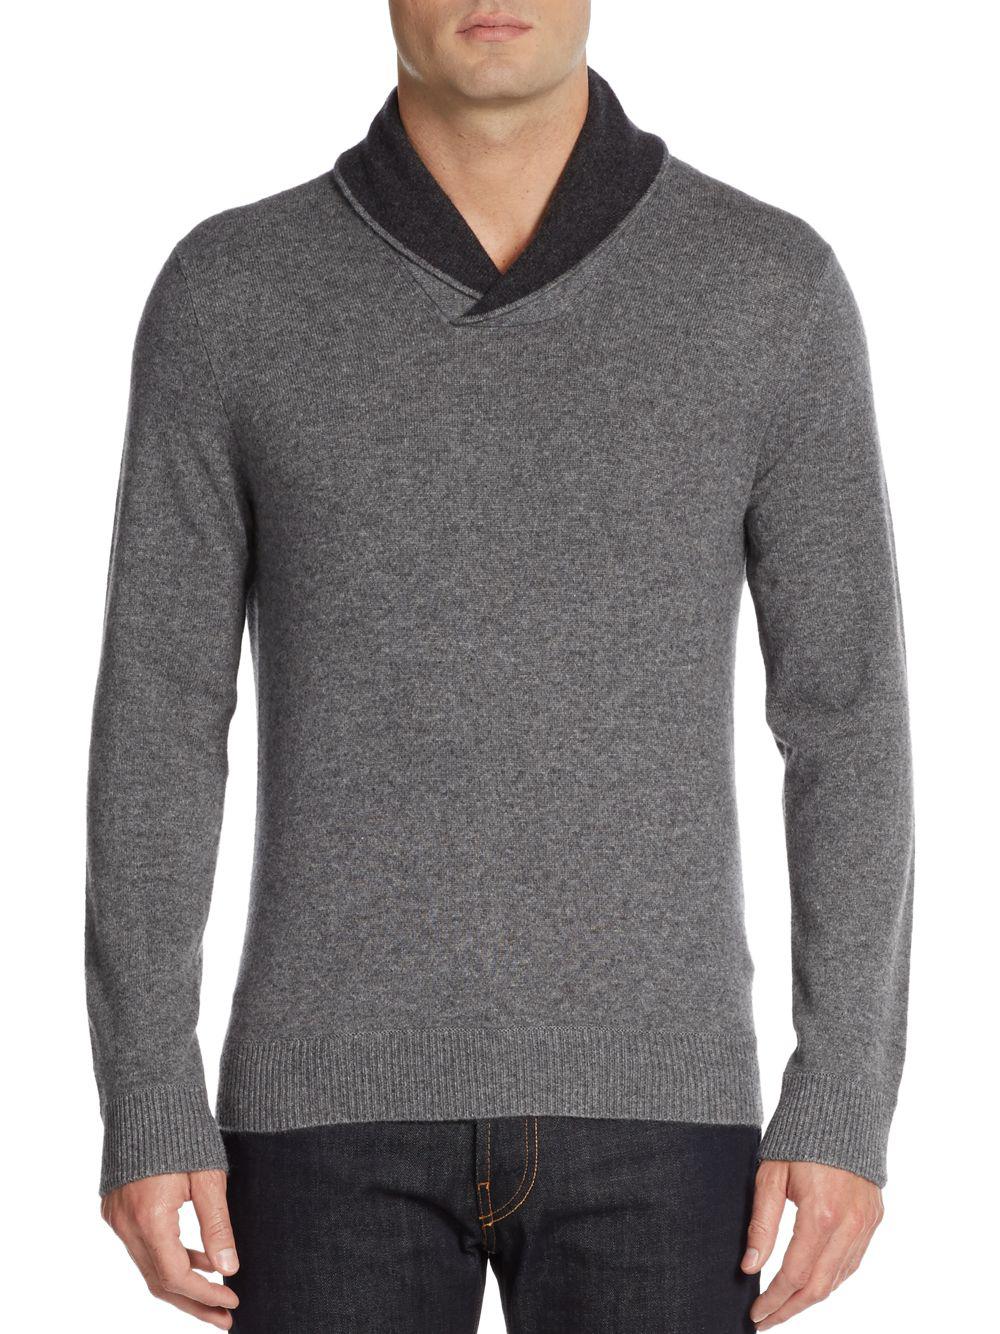 Saks Fifth Avenue Shawl Collar Cashmere Sweater in Gray for Men - Lyst